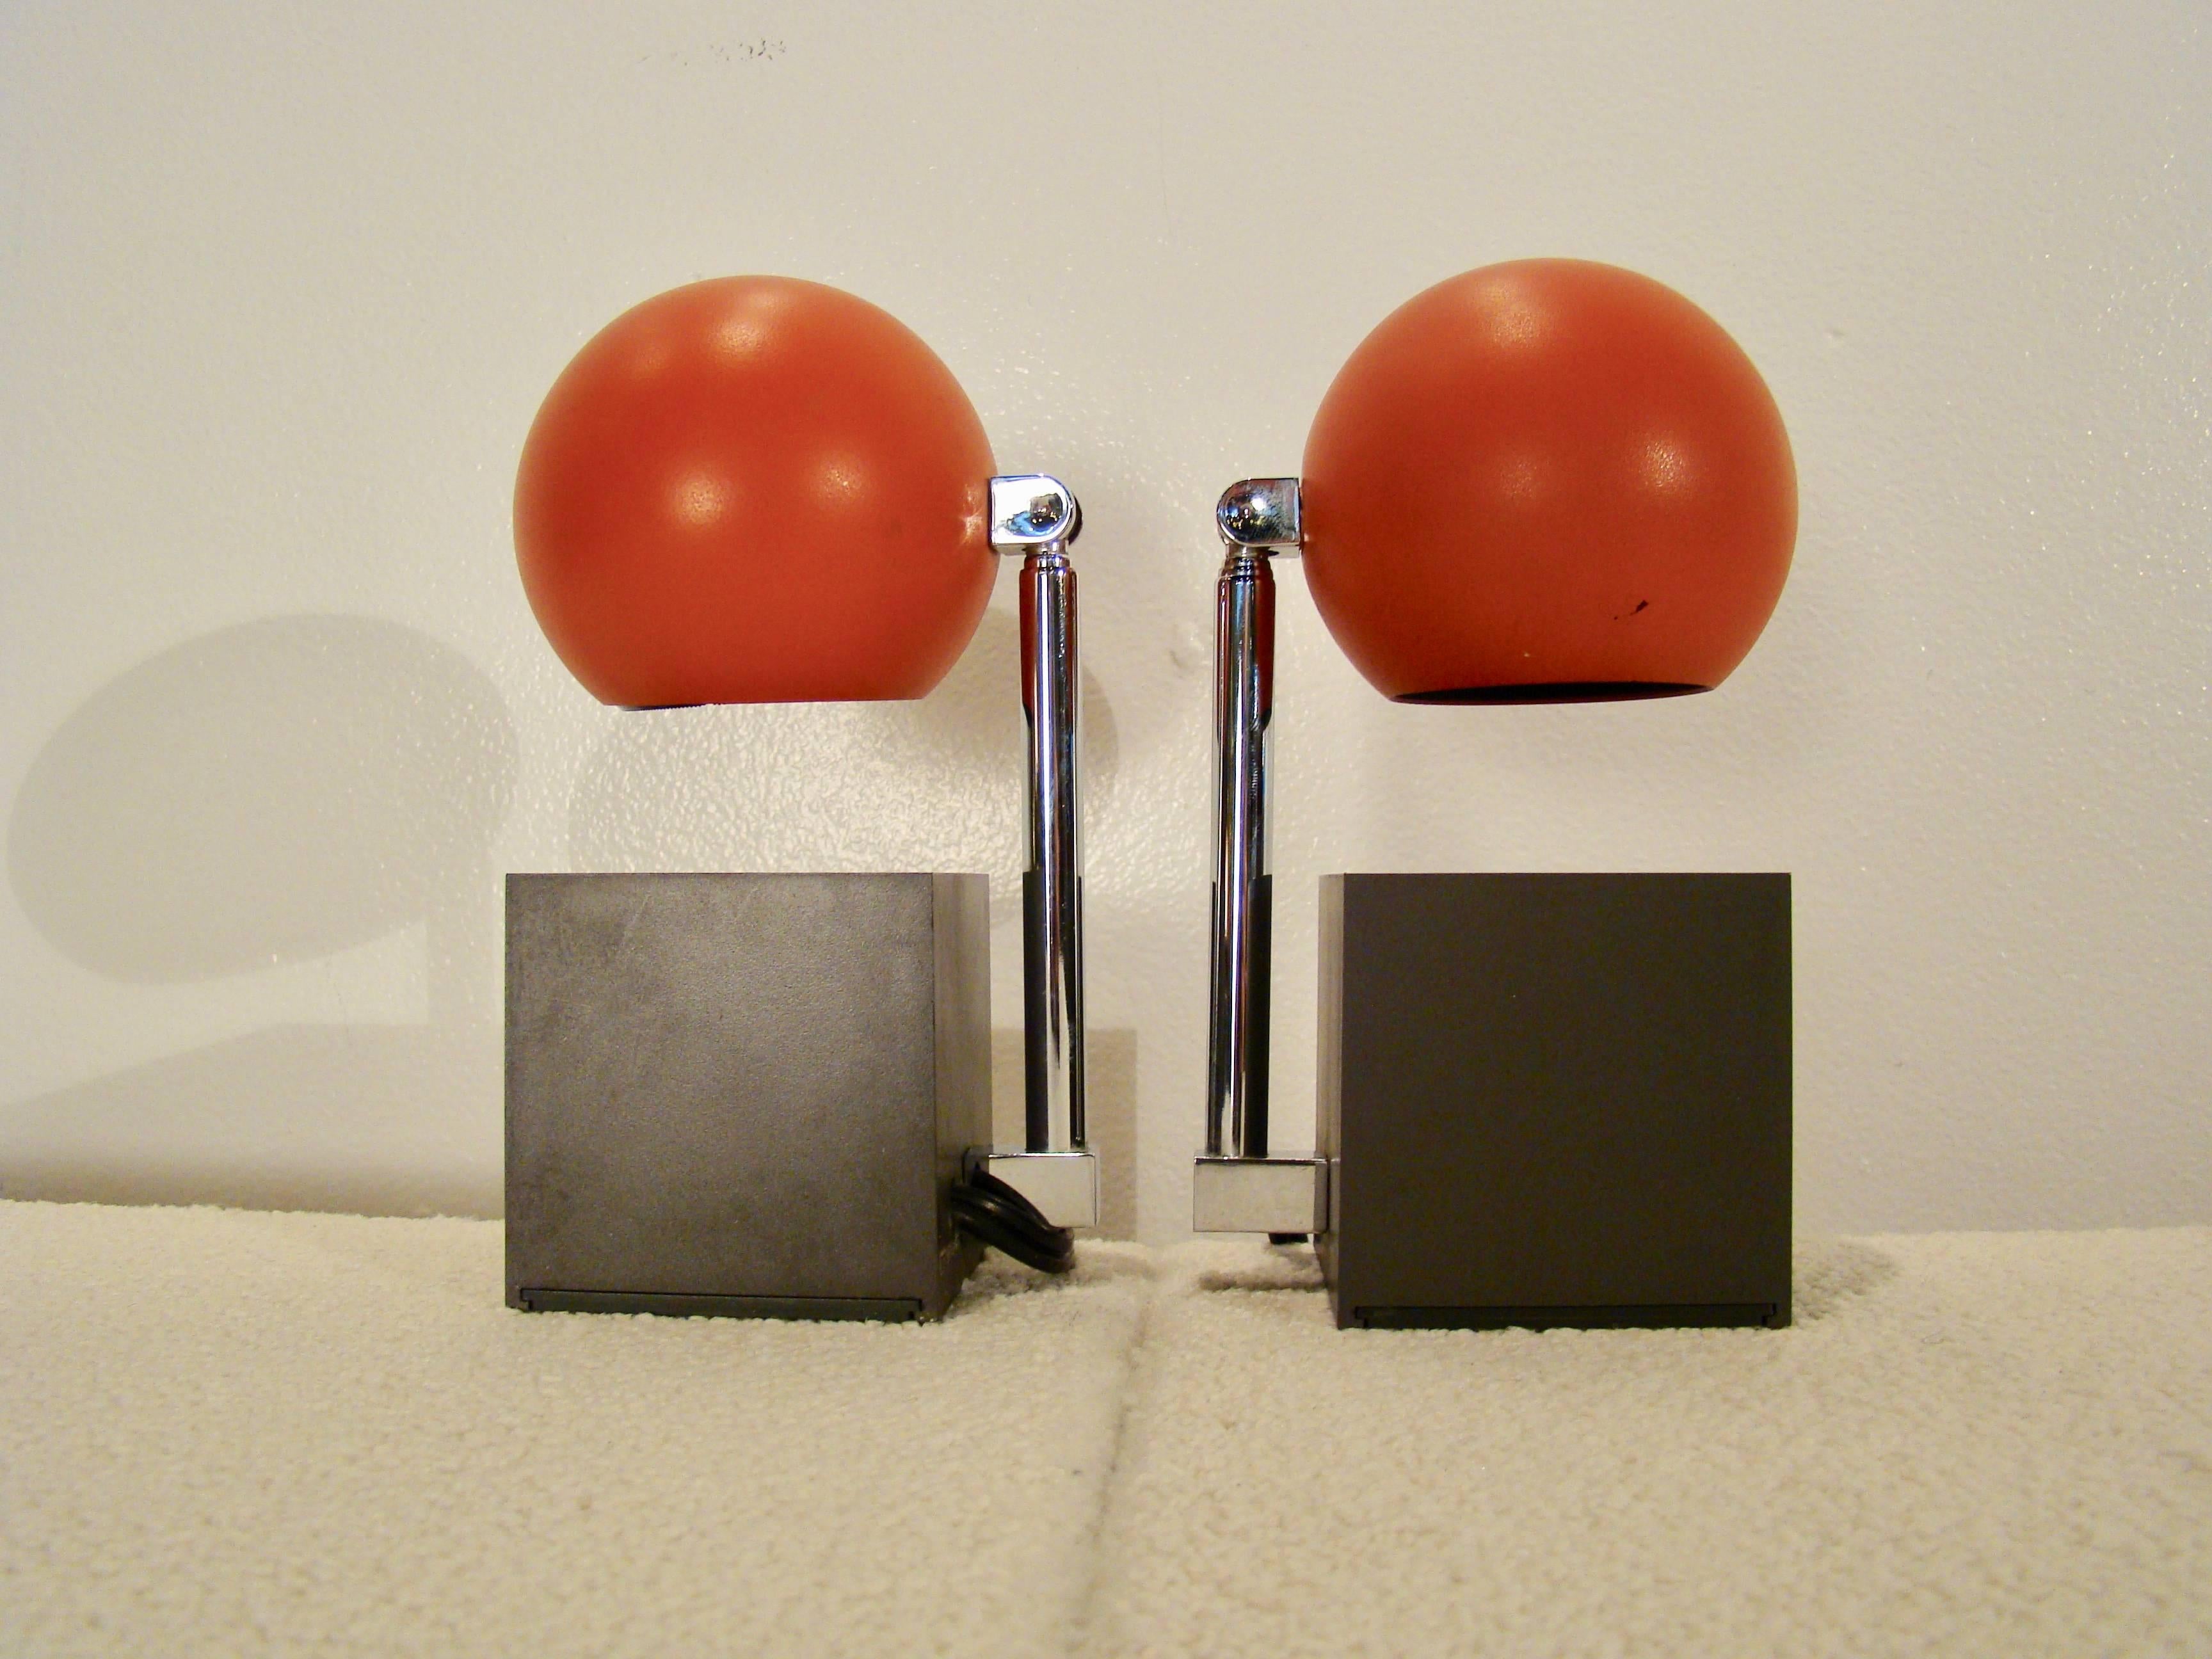 Pair of telescopic eyeball task lamps by Michael Lax for Lightolier in original boxes. Chrome base with a spherical light on a telescoping arm which adjusts from 6.5"-15".